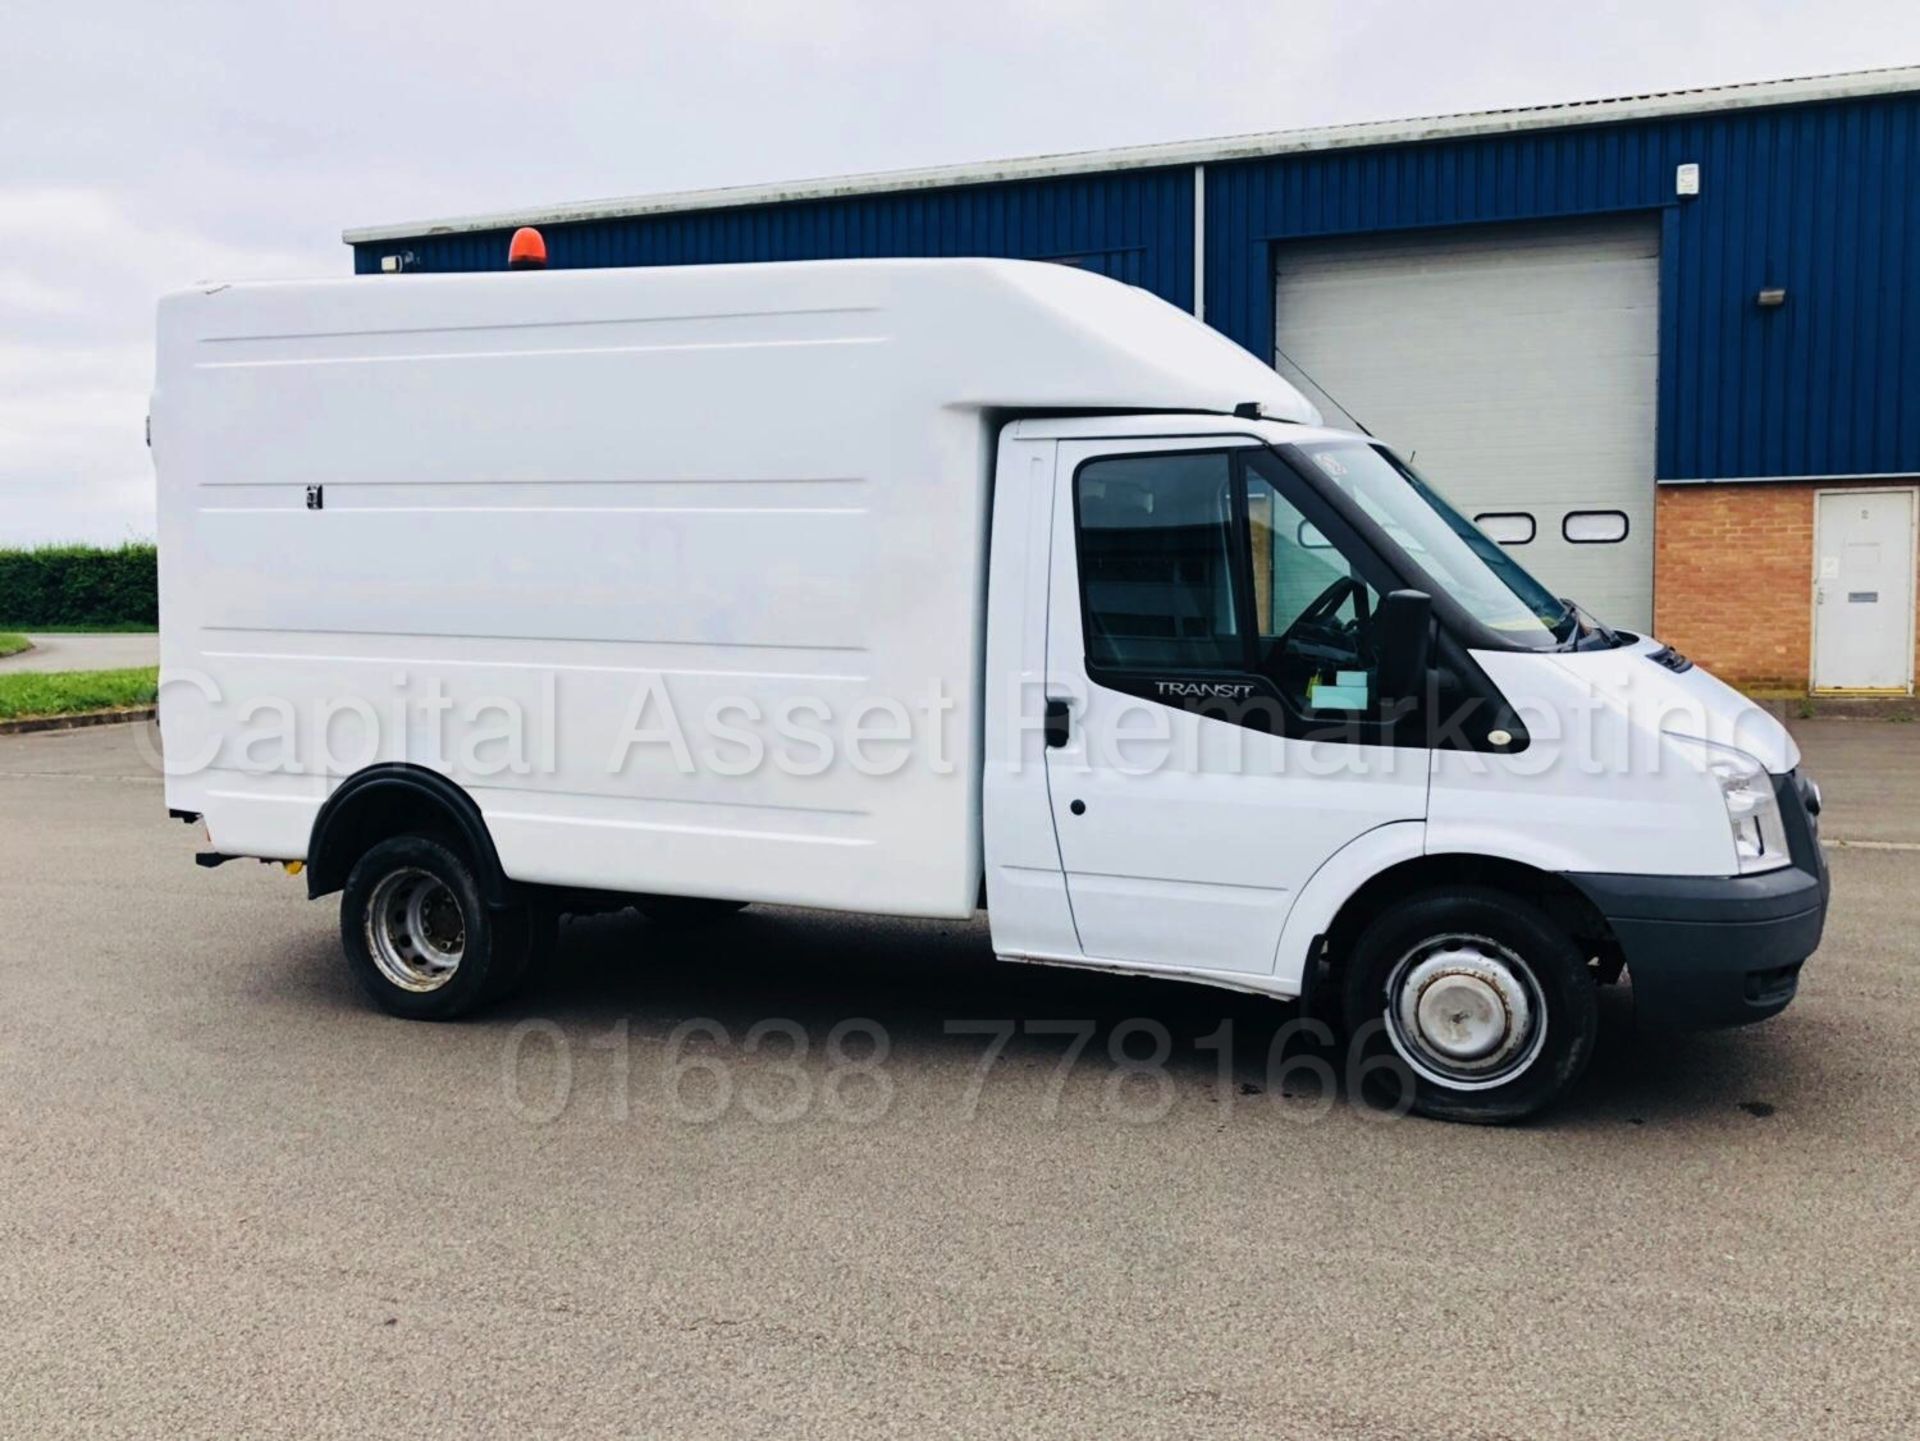 (On Sale) FORD TRANSIT 100 350 'BOX / LUTON VAN' (2010) '2.4 TDCI - 100 BHP' (1 COMPANY OWNER) - Image 8 of 29